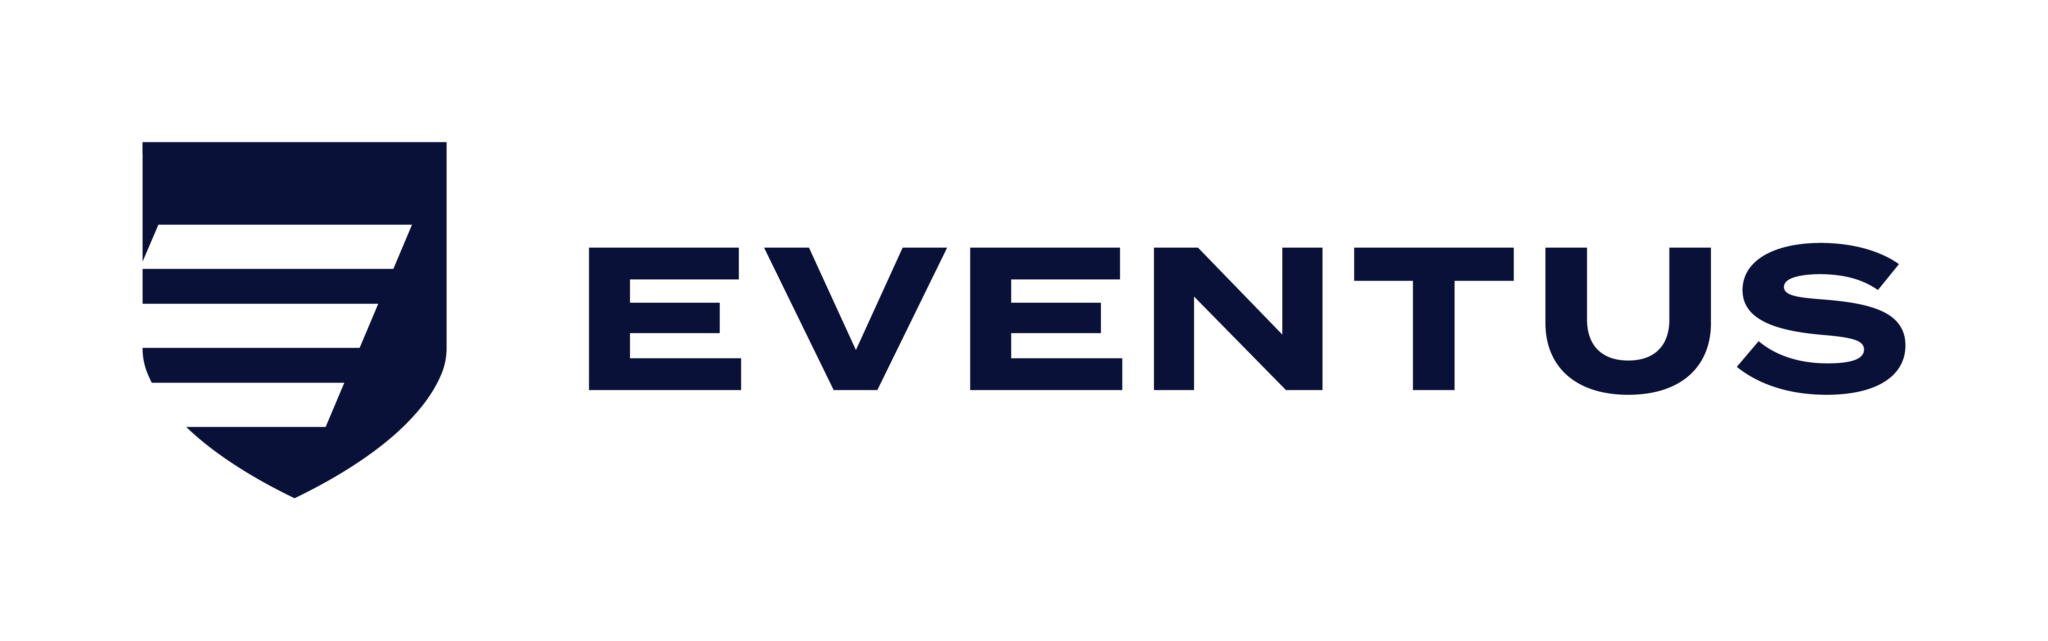 Eventus Systems, Inc., a leading global provider of multi-asset class trade surveillance and market risk solutions, today announced that it has closed on a $30 million Series B funding round, led by Centana Growth Partners.